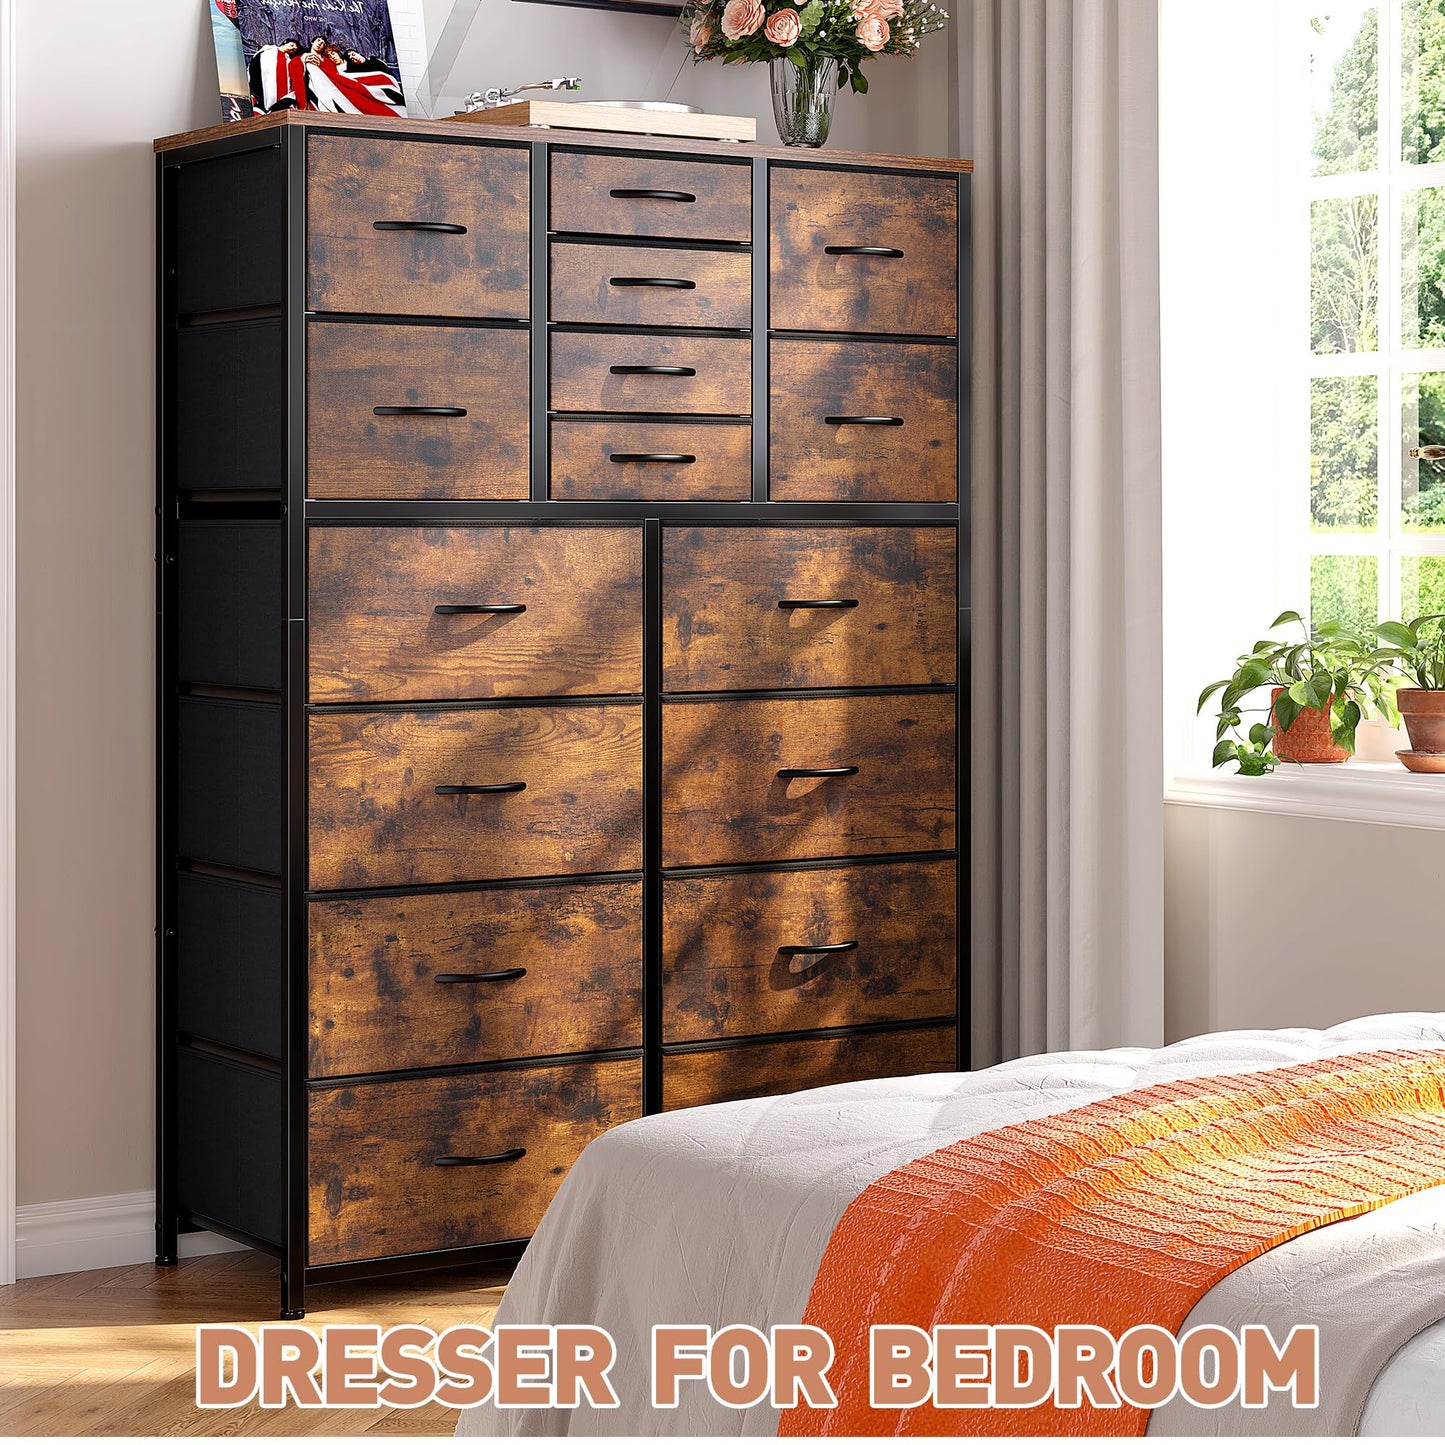 EnHomee Dresser for Bedroom with 16 Drawers, Tall Dressers for Bedroom with Wood Top and Metal Frame, Large Bedroom Dressers & Chest of Drawers for Bedroom, Closets, Nursery, Living Room, Rustic Brown